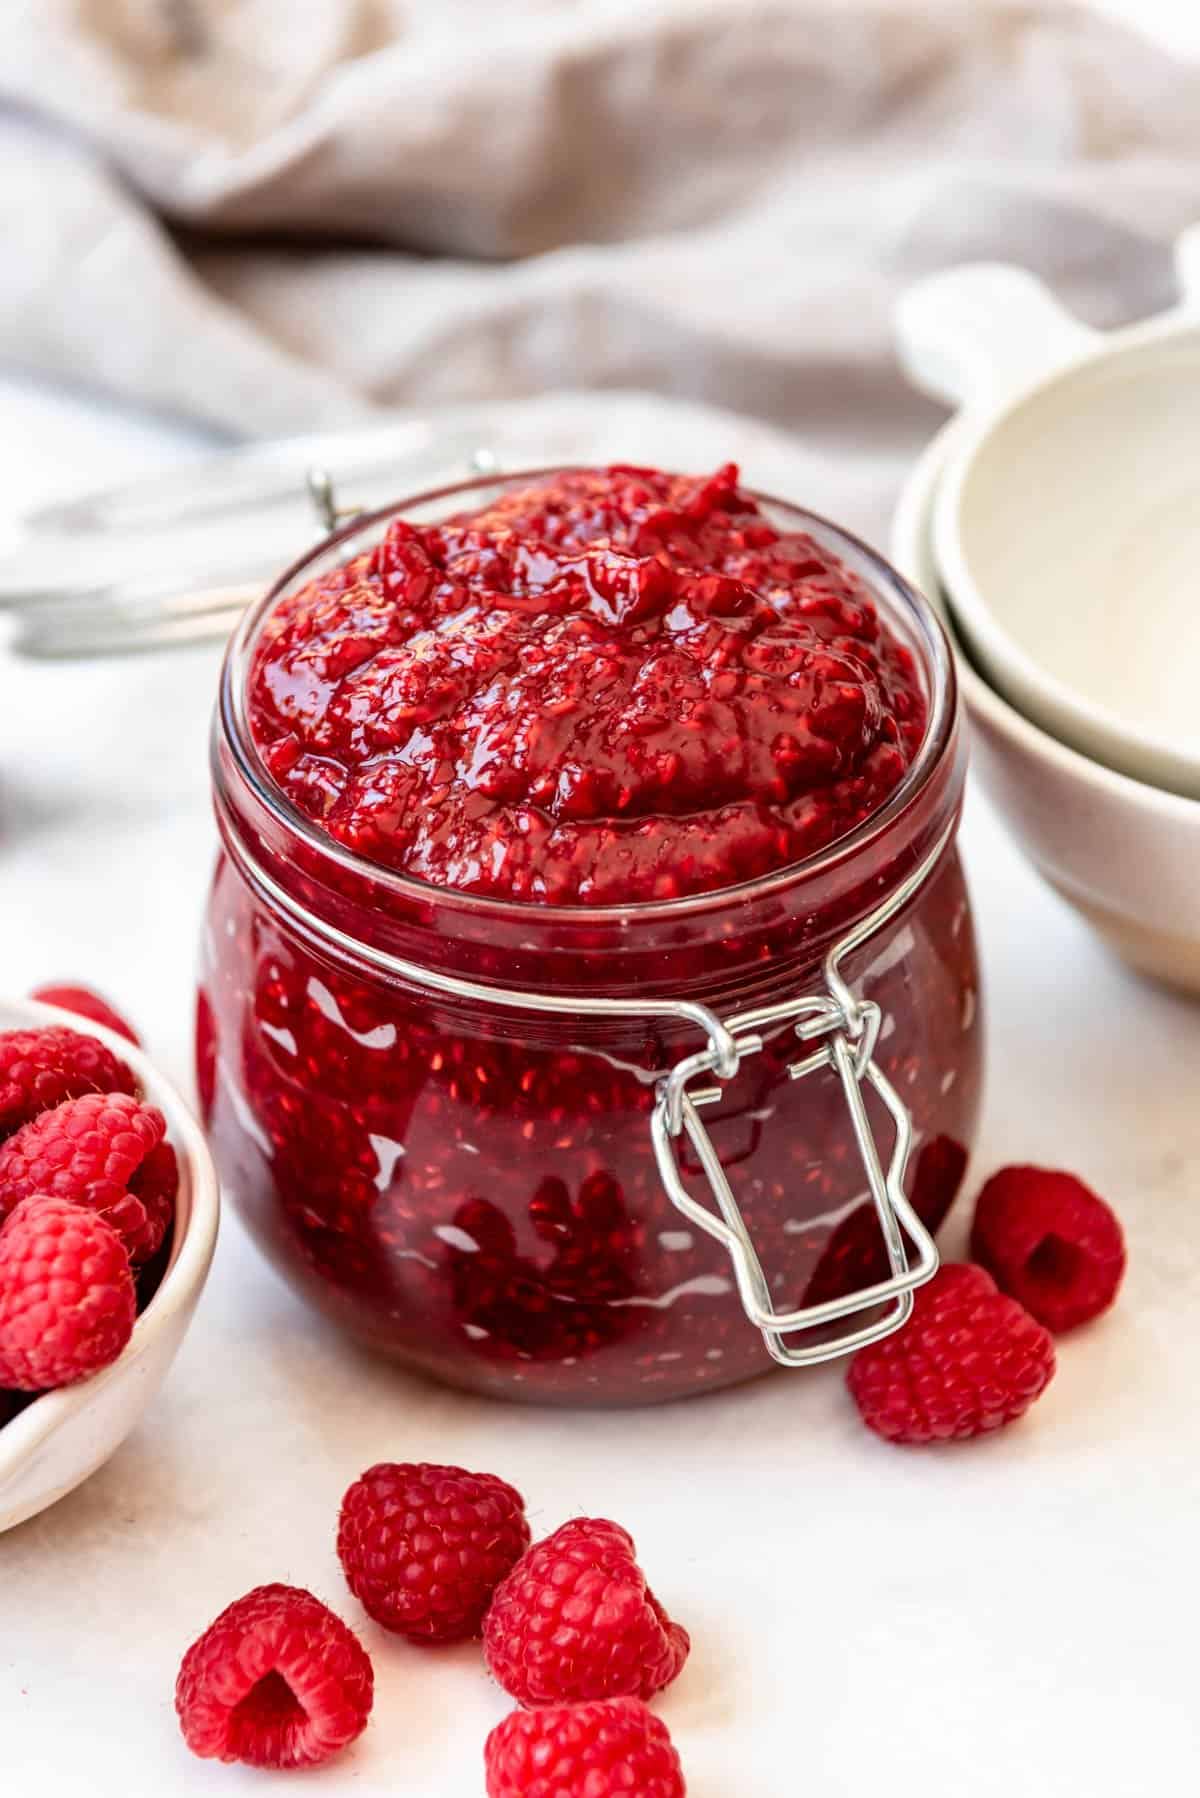 Raspberry cake filling made with frozen raspberries.